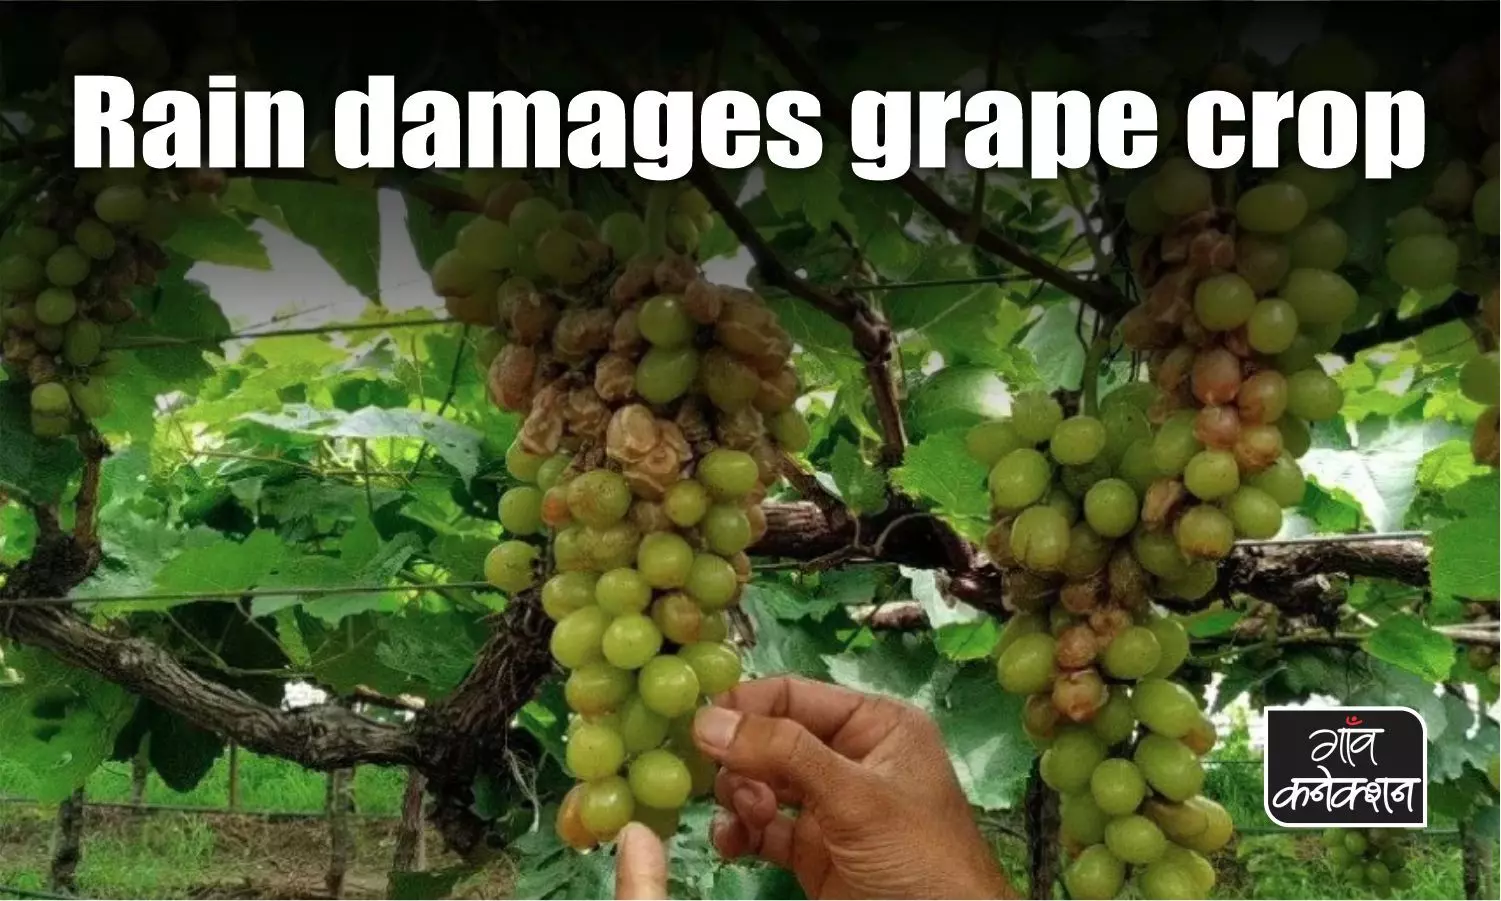 In Maharashtra, rains quash grapes mercilessly. You may have to shell out more to buy grapes this season